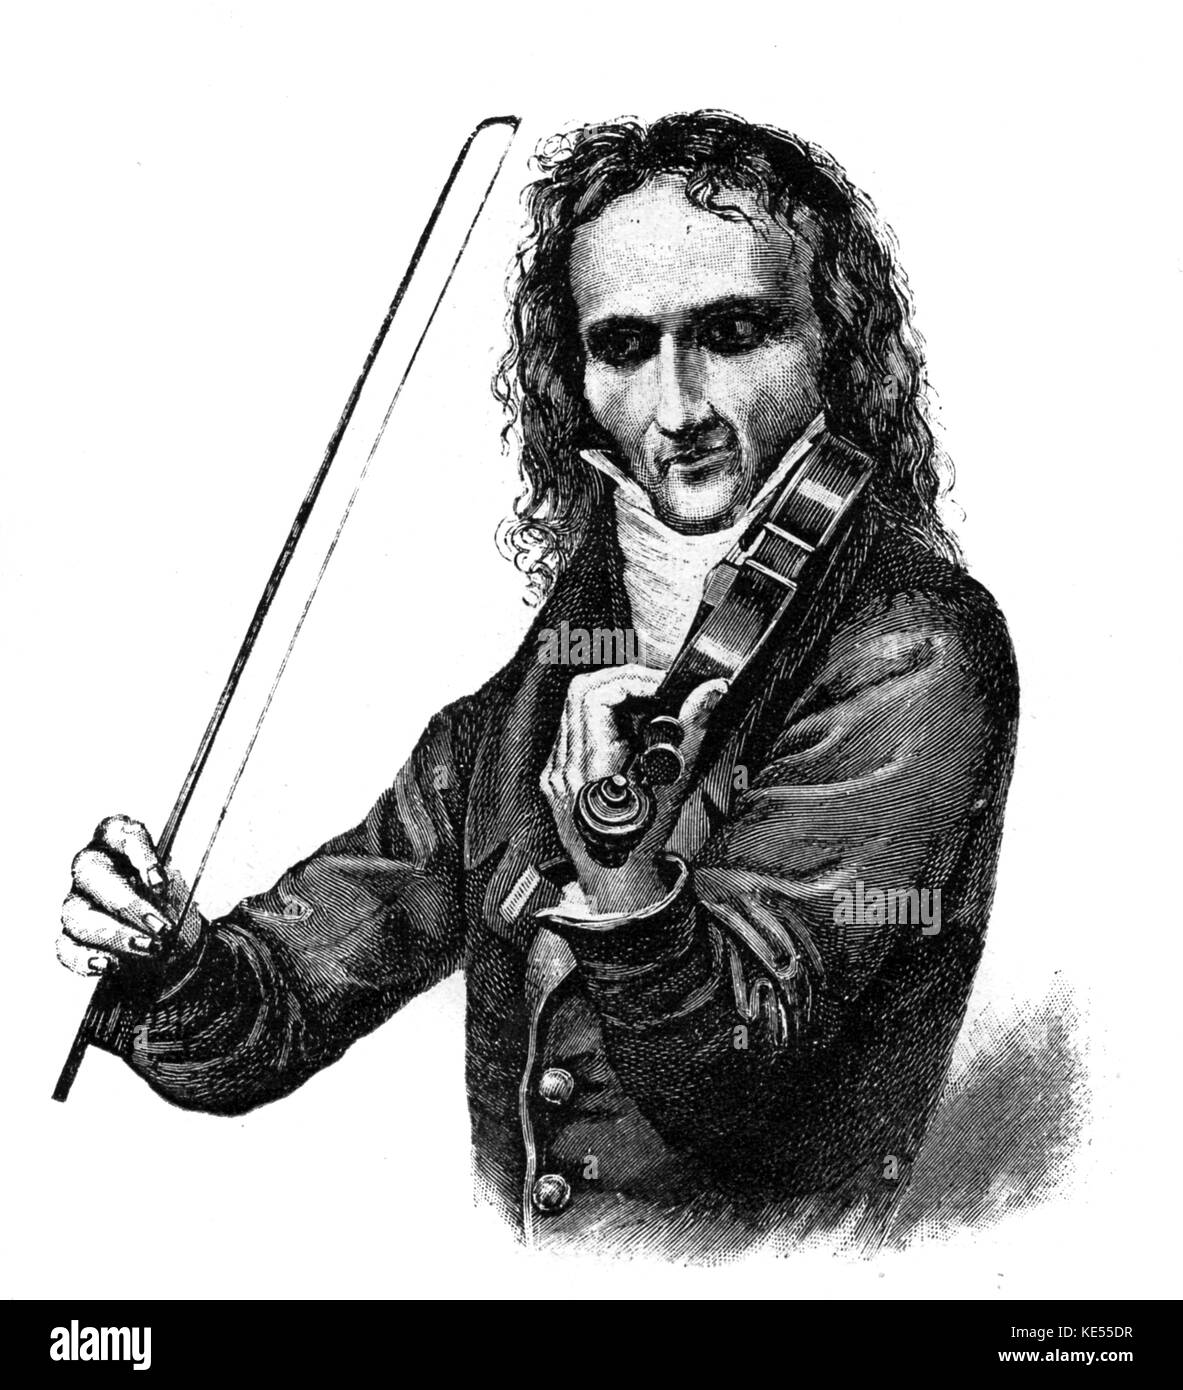 Niccolo Paganini - portrait of the Italian violinist and composer playing the violin. 27 October 1782 - 27 May 1840. Stock Photo